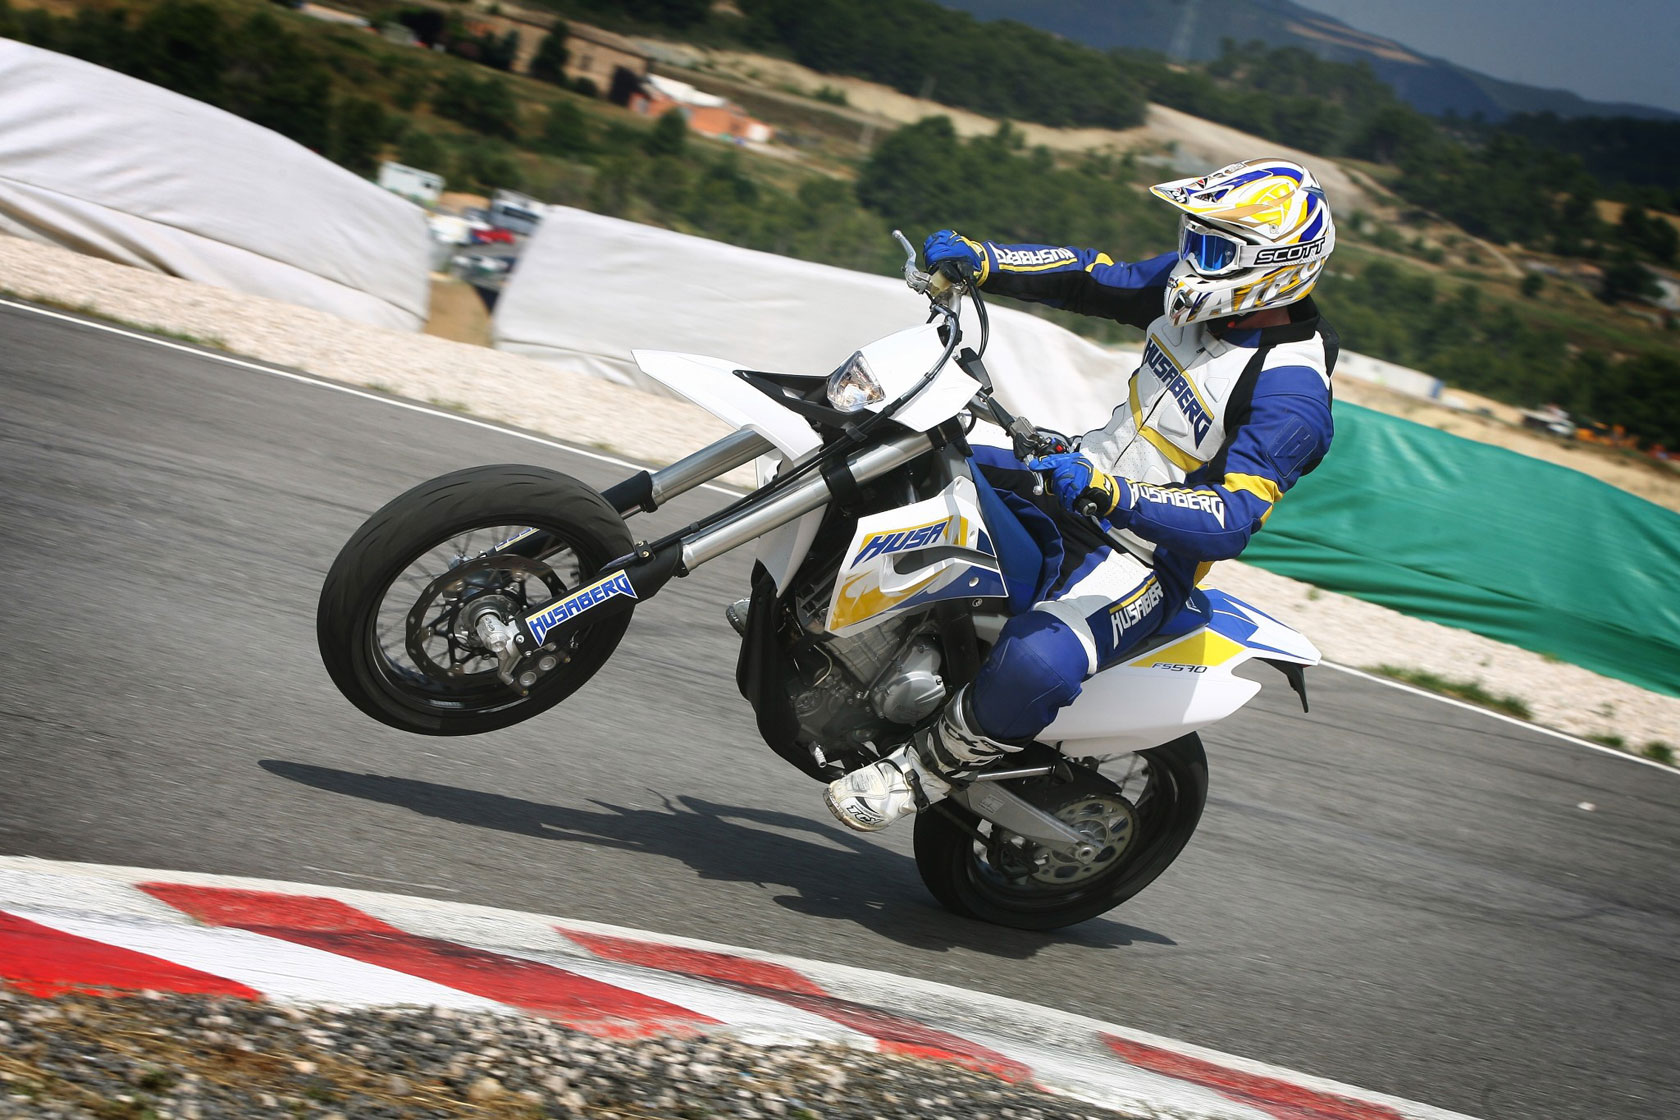 Supermoto wallpapers WallpaperUP